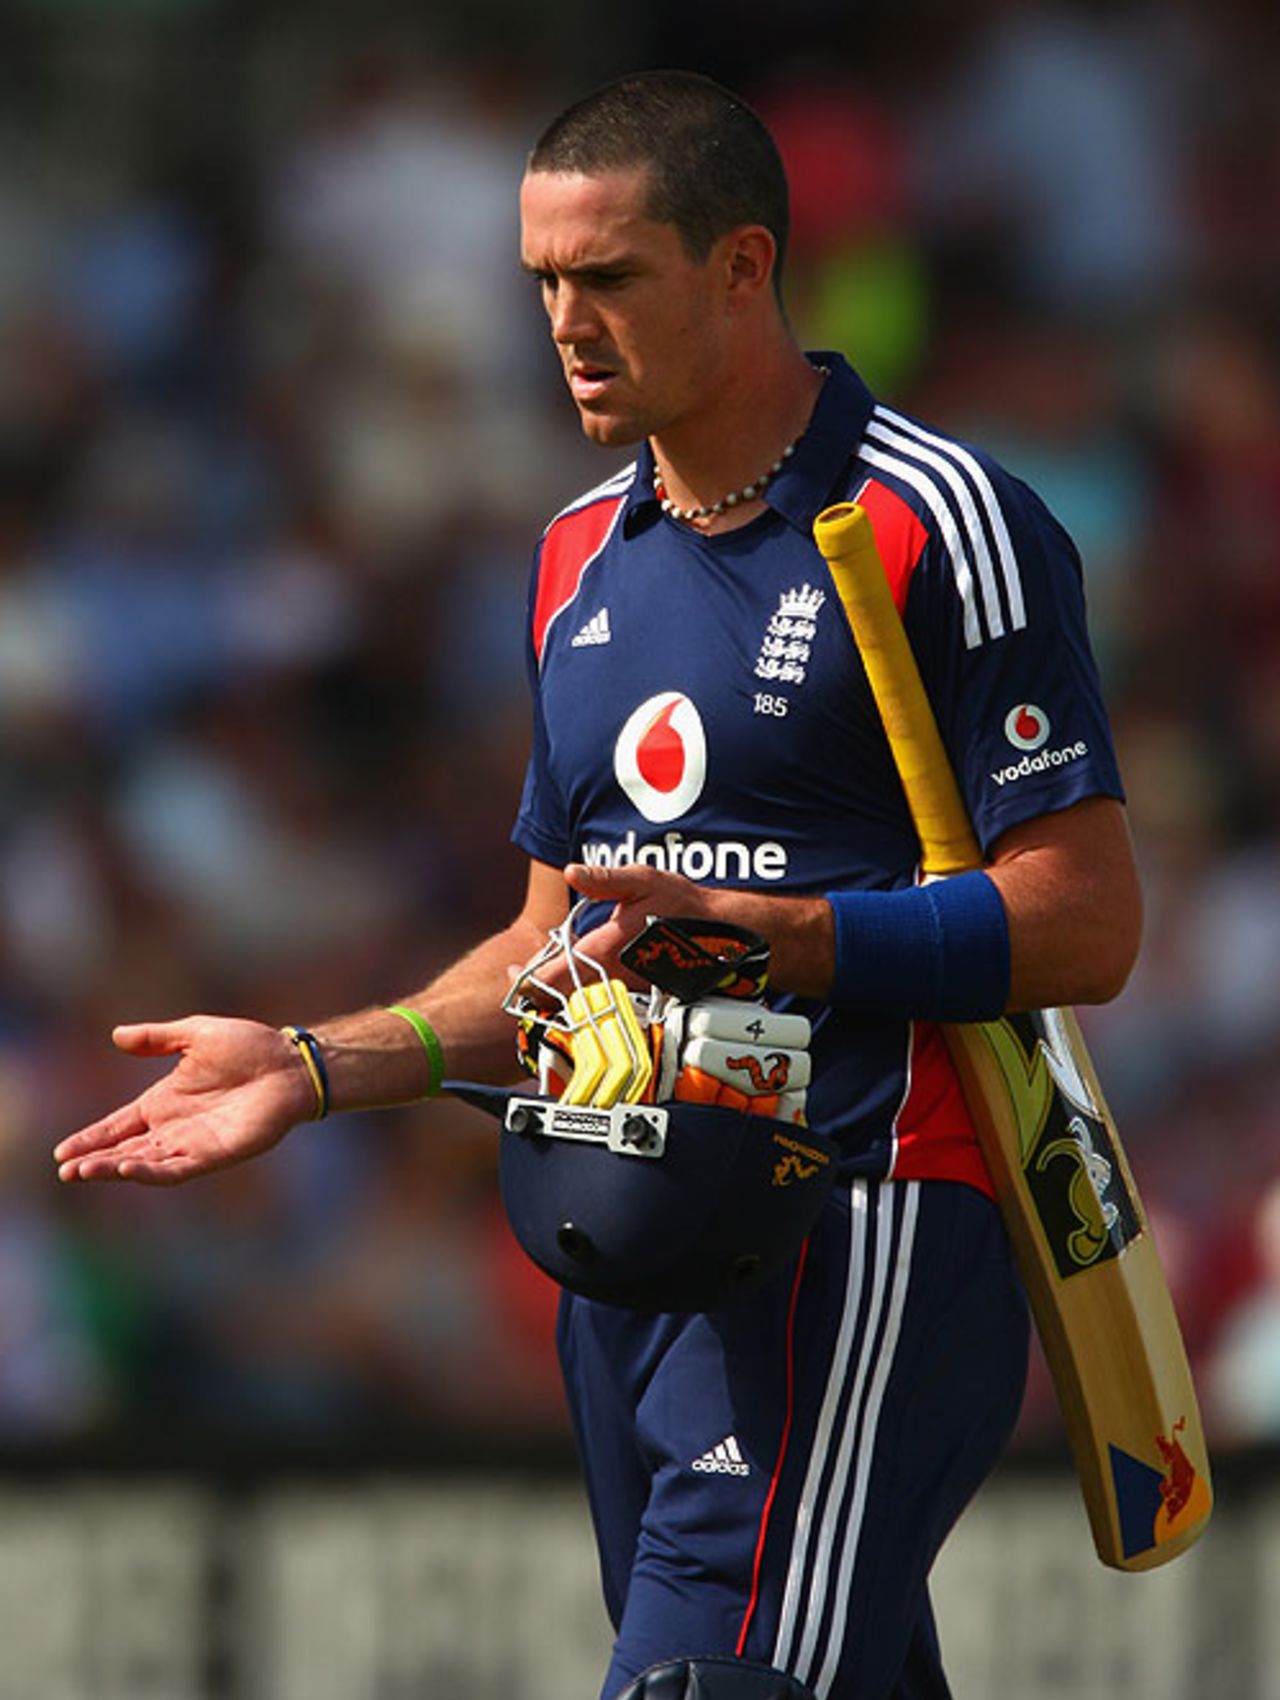 Disappointment for Kevin Pietersen in his first innings as England captain, England v New Zealand, 5th ODI, Lord's, June 28, 2008